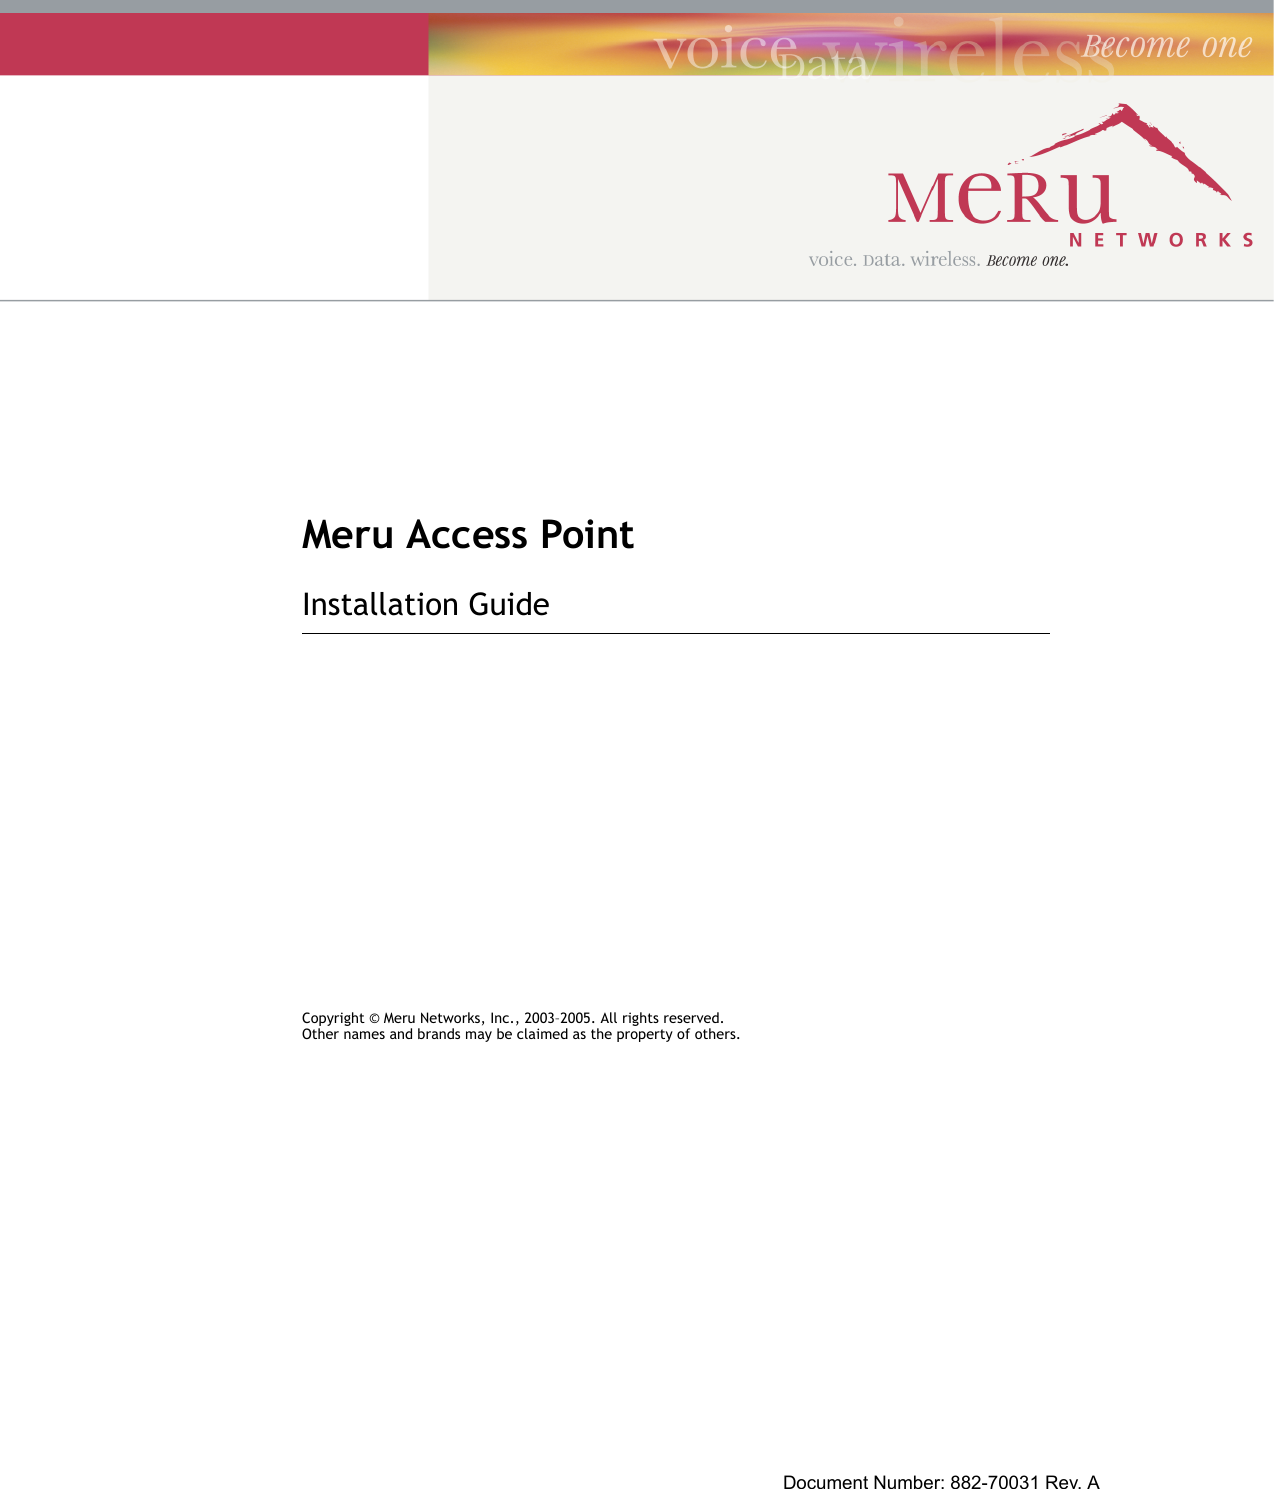 Meru Access PointInstallation GuideCopyright © Meru Networks, Inc., 2003–2005. All rights reserved.Other names and brands may be claimed as the property of others.Document Number: 882-70031 Rev. A